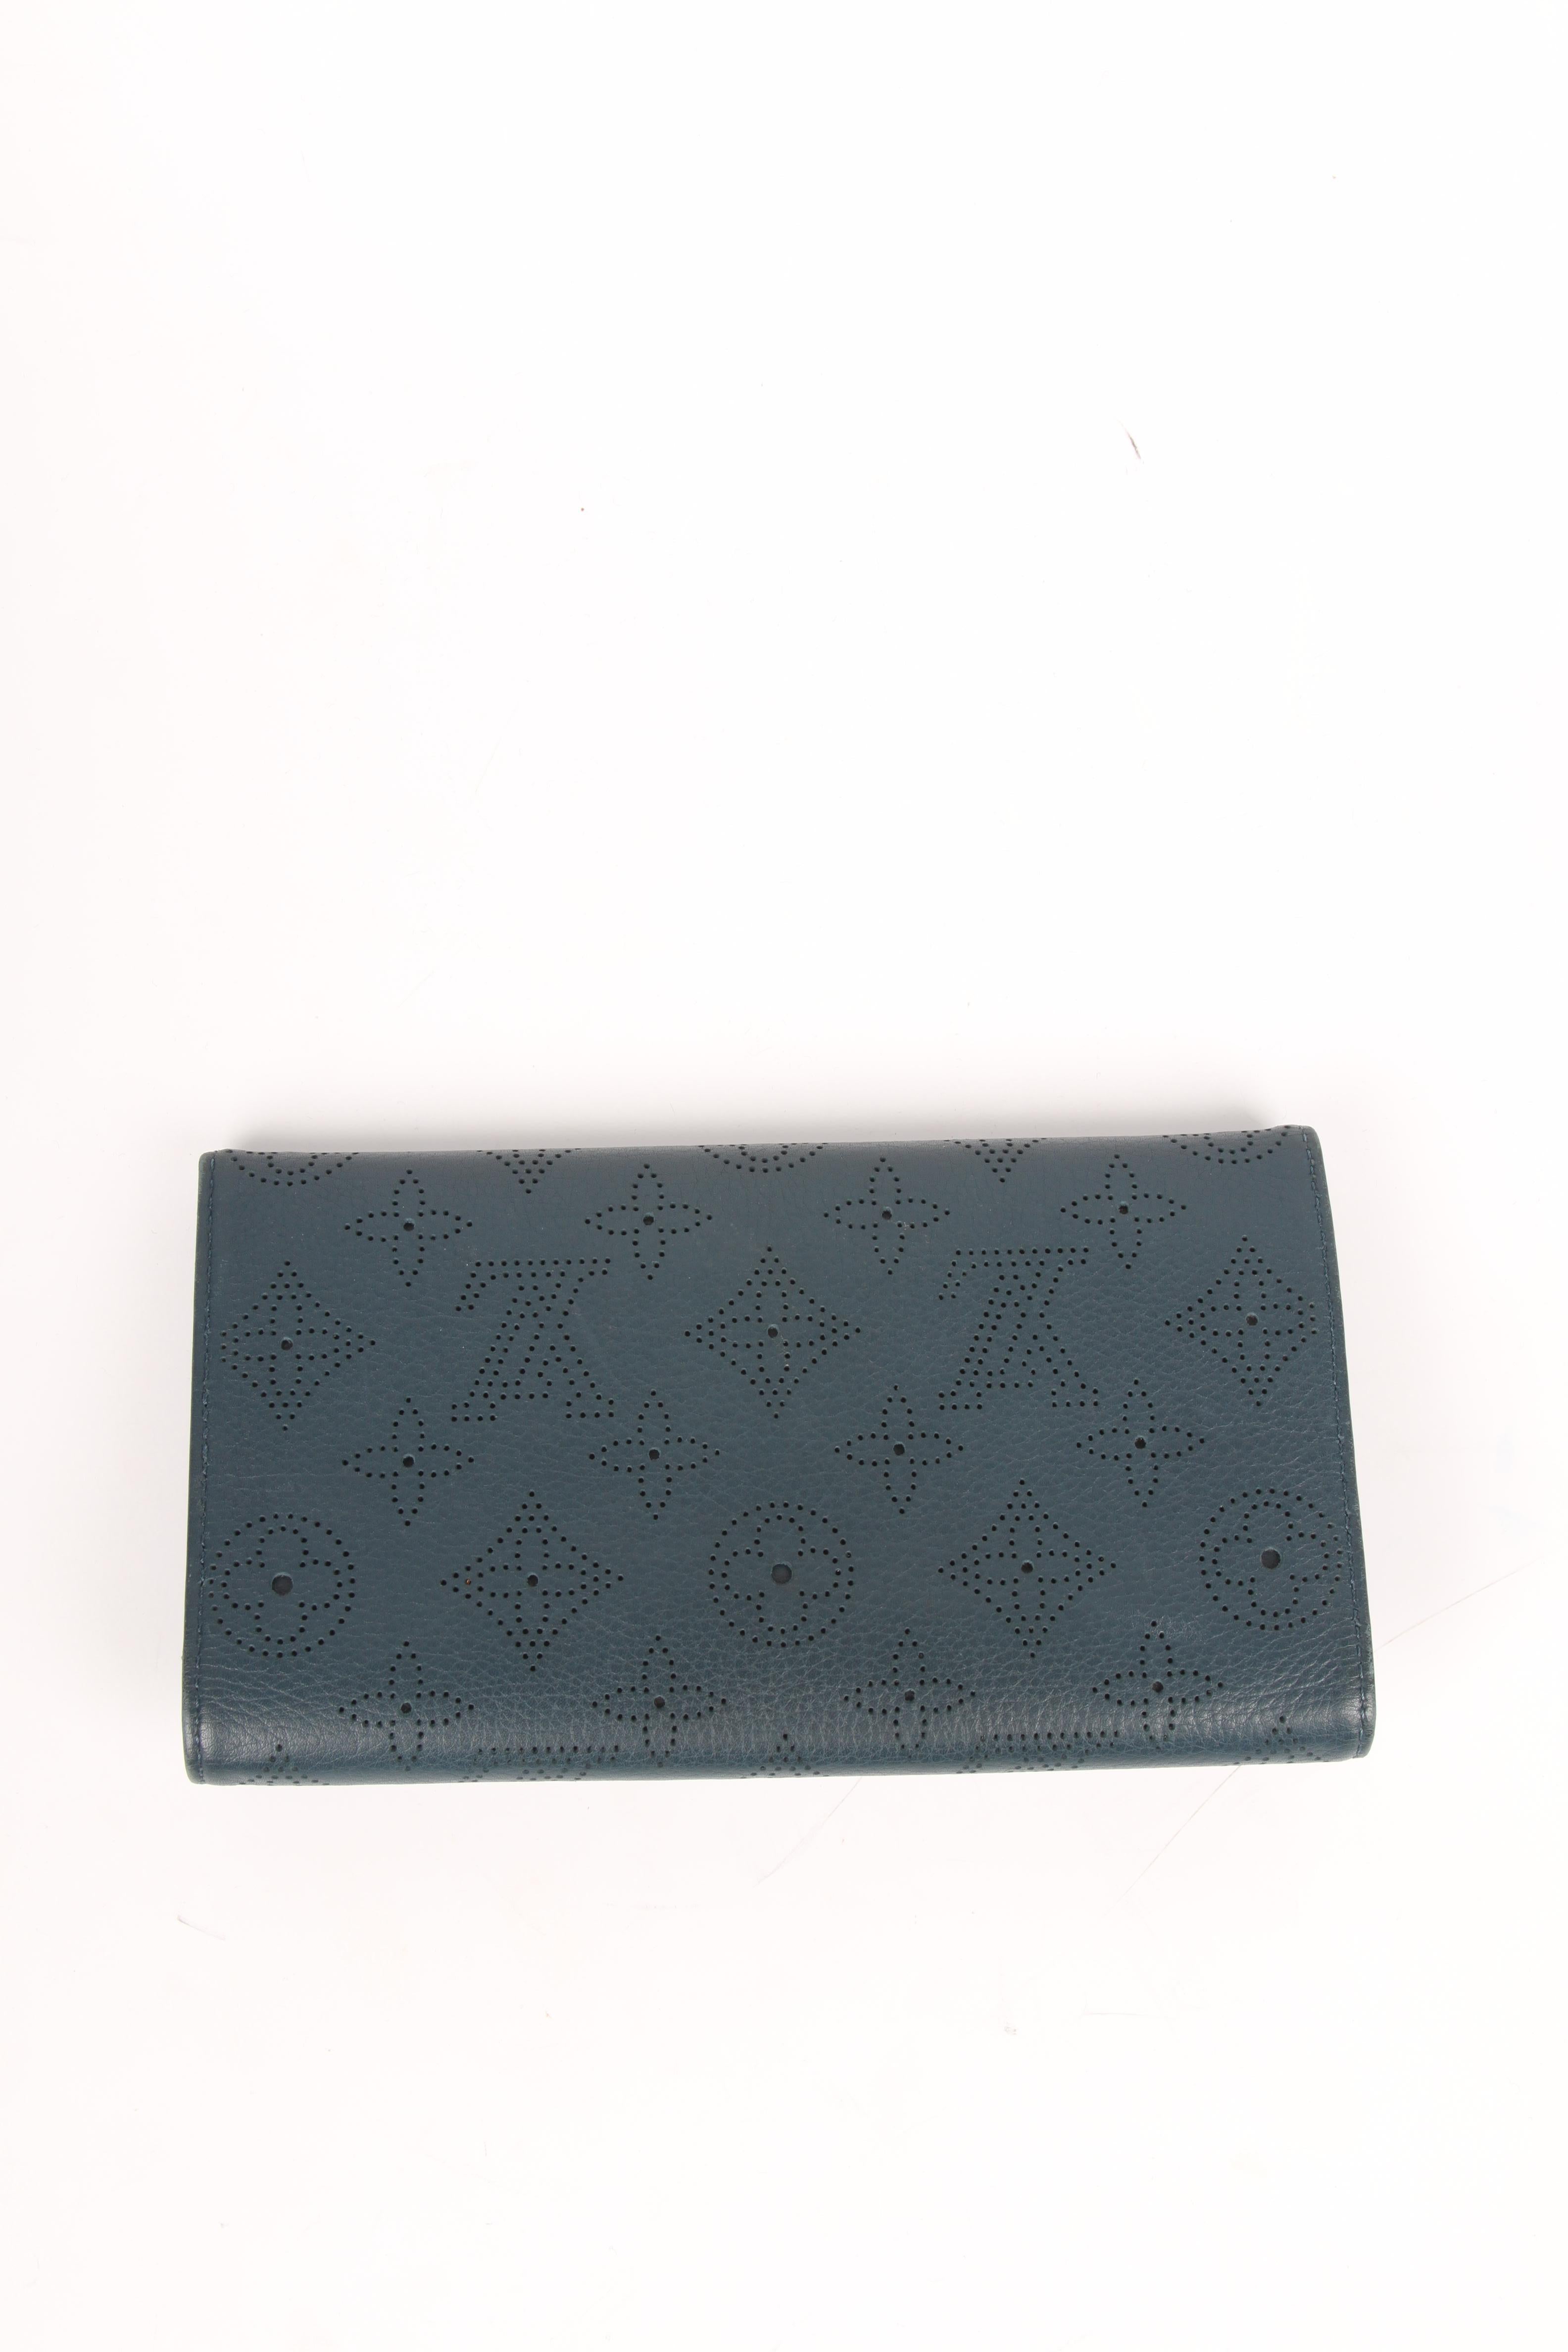 We love Louis Vuitton... And we want this wallet now! Now!

This spacious wallet carries the name Amelia Wallet, and this one is crafted from dark blue Mahina leather. Mahina is Polynesian for a lunar deity. The welknown LV monograms are very subtle